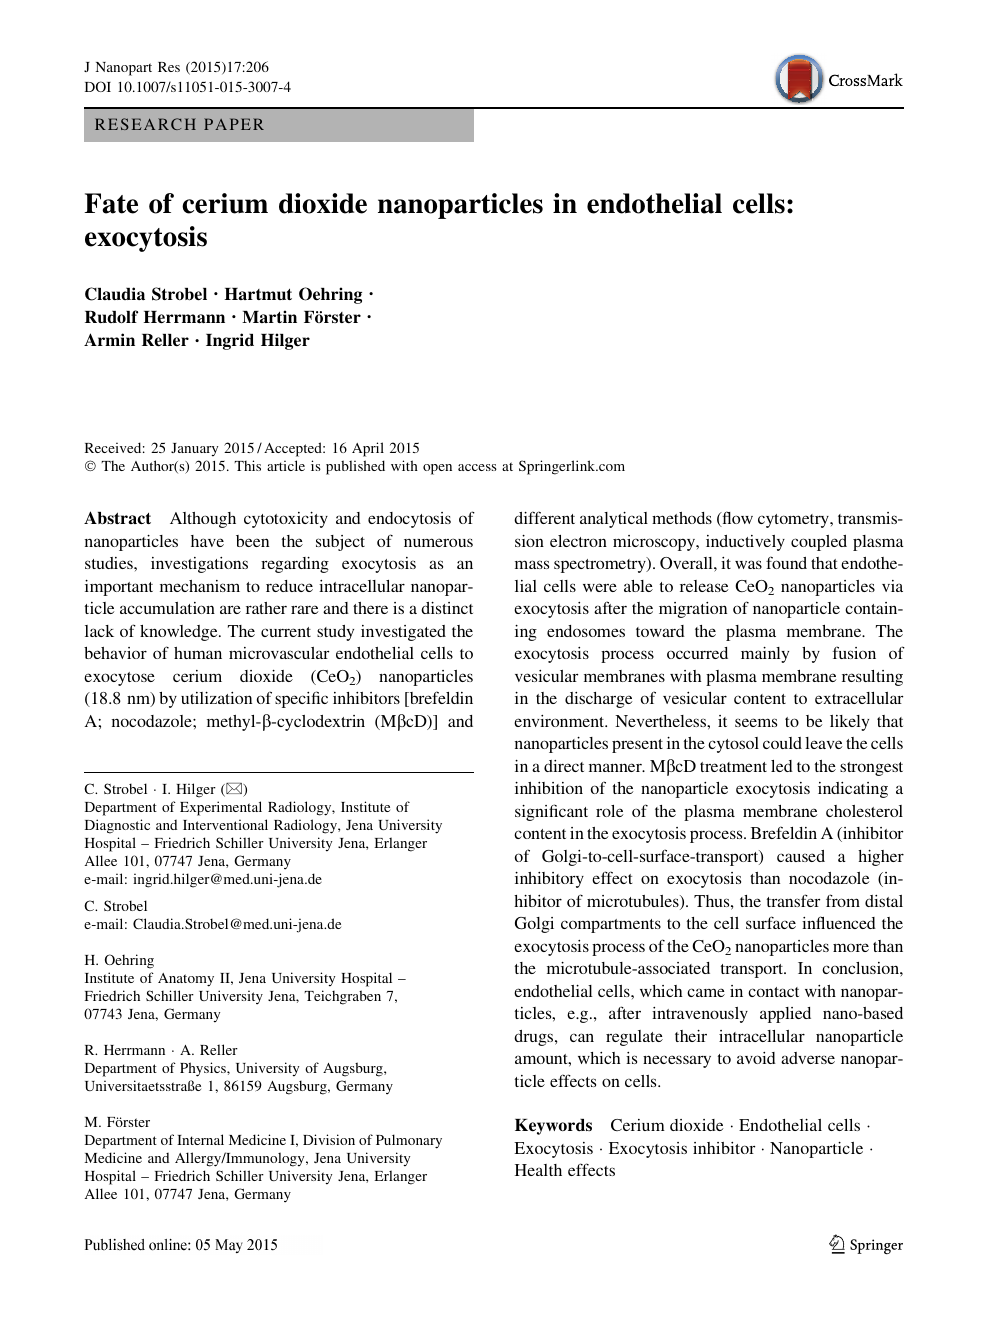 Fate Of Cerium Dioxide Nanoparticles In Endothelial Cells Exocytosis Topic Of Research Paper In Nano Technology Download Scholarly Article Pdf And Read For Free On Cyberleninka Open Science Hub